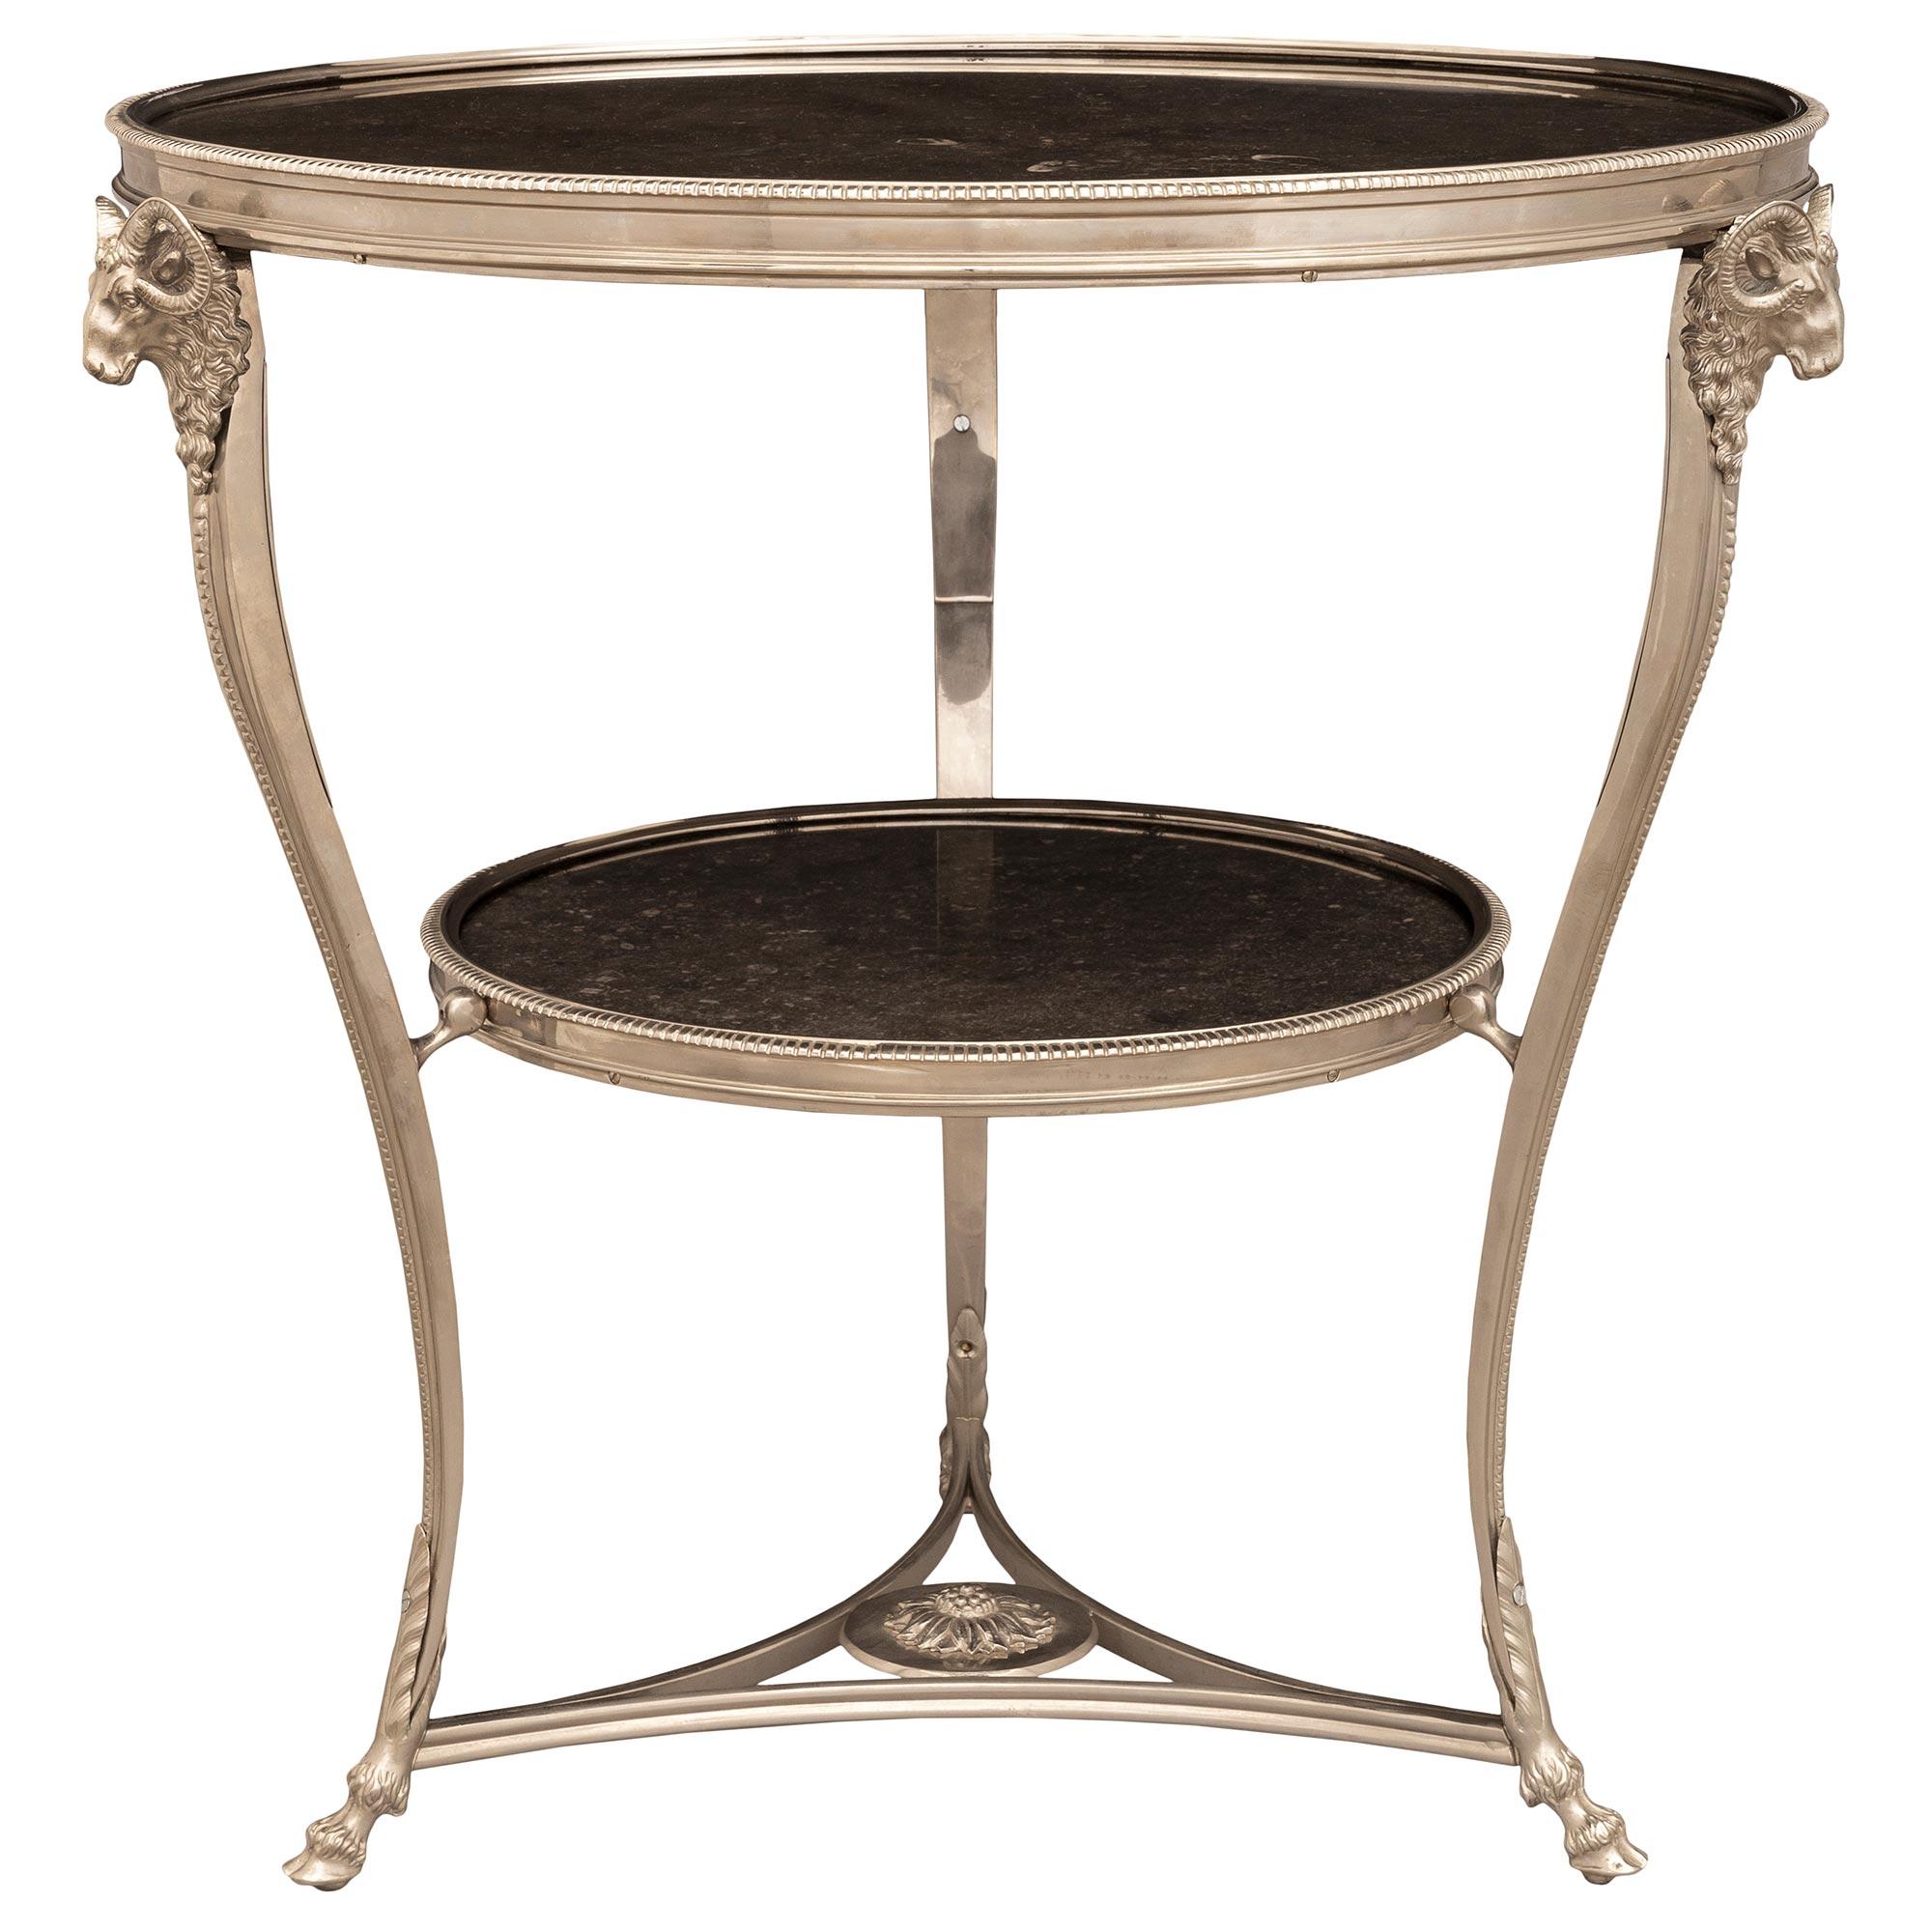 French 19th Century Louis XVI St. Silvered Bronze And Marble Guéridon Side Table In Good Condition For Sale In West Palm Beach, FL